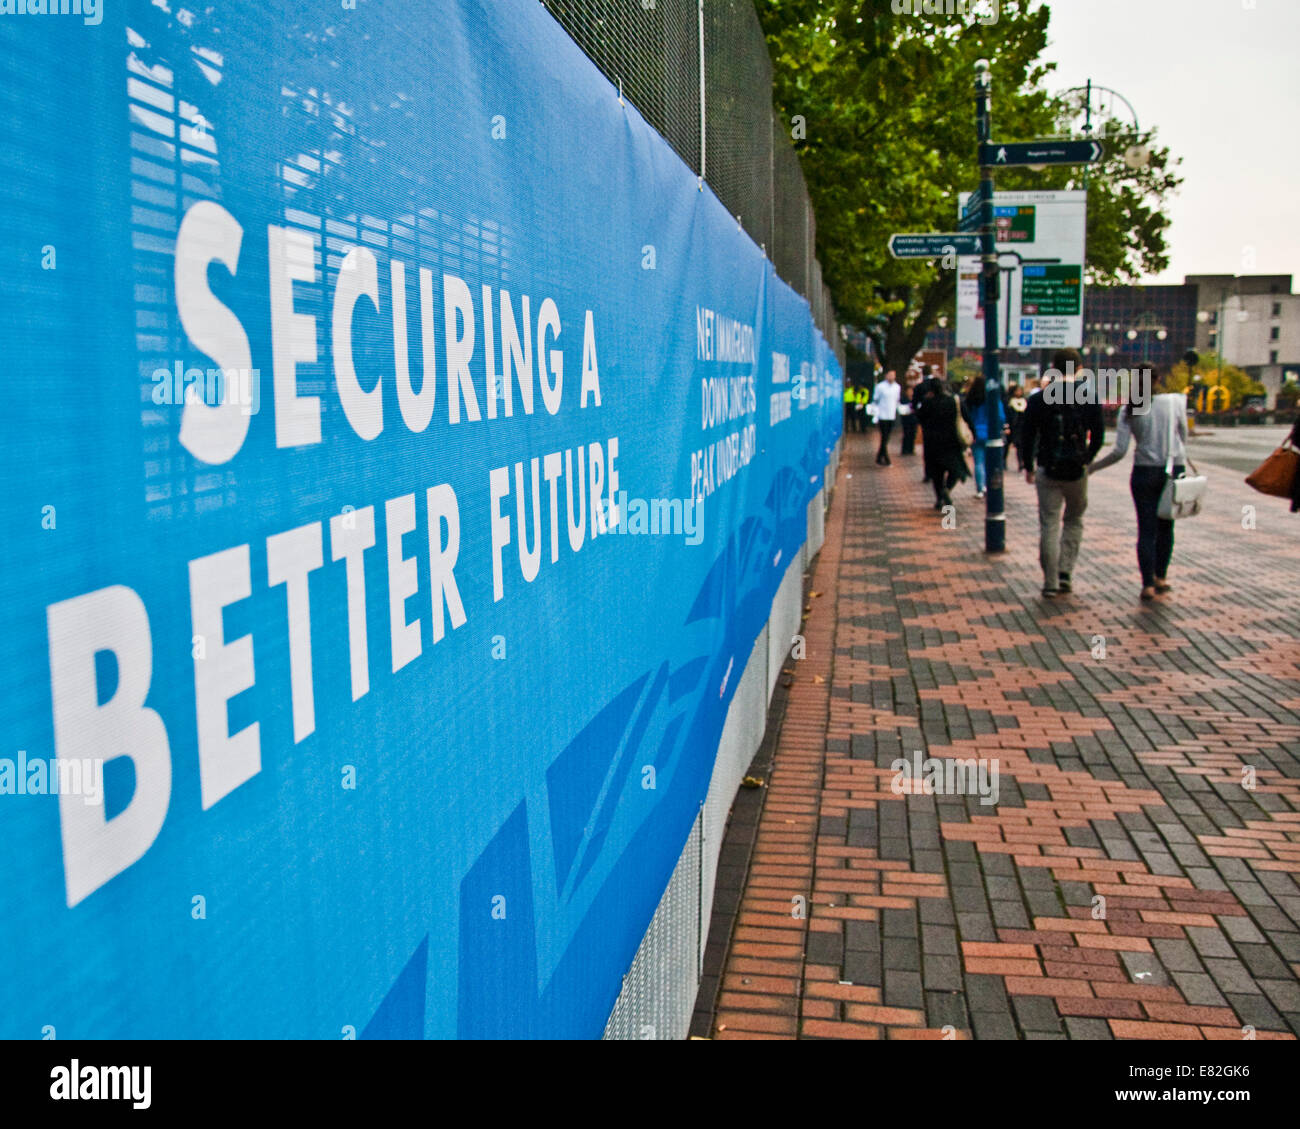 Birmingham, UK 29//2014. A couple walk past a Conservative slogan declaring that the party will secure a better future at its annual conference in Birmingham (C) Paul Swinney/Alamy Live News Stock Photo